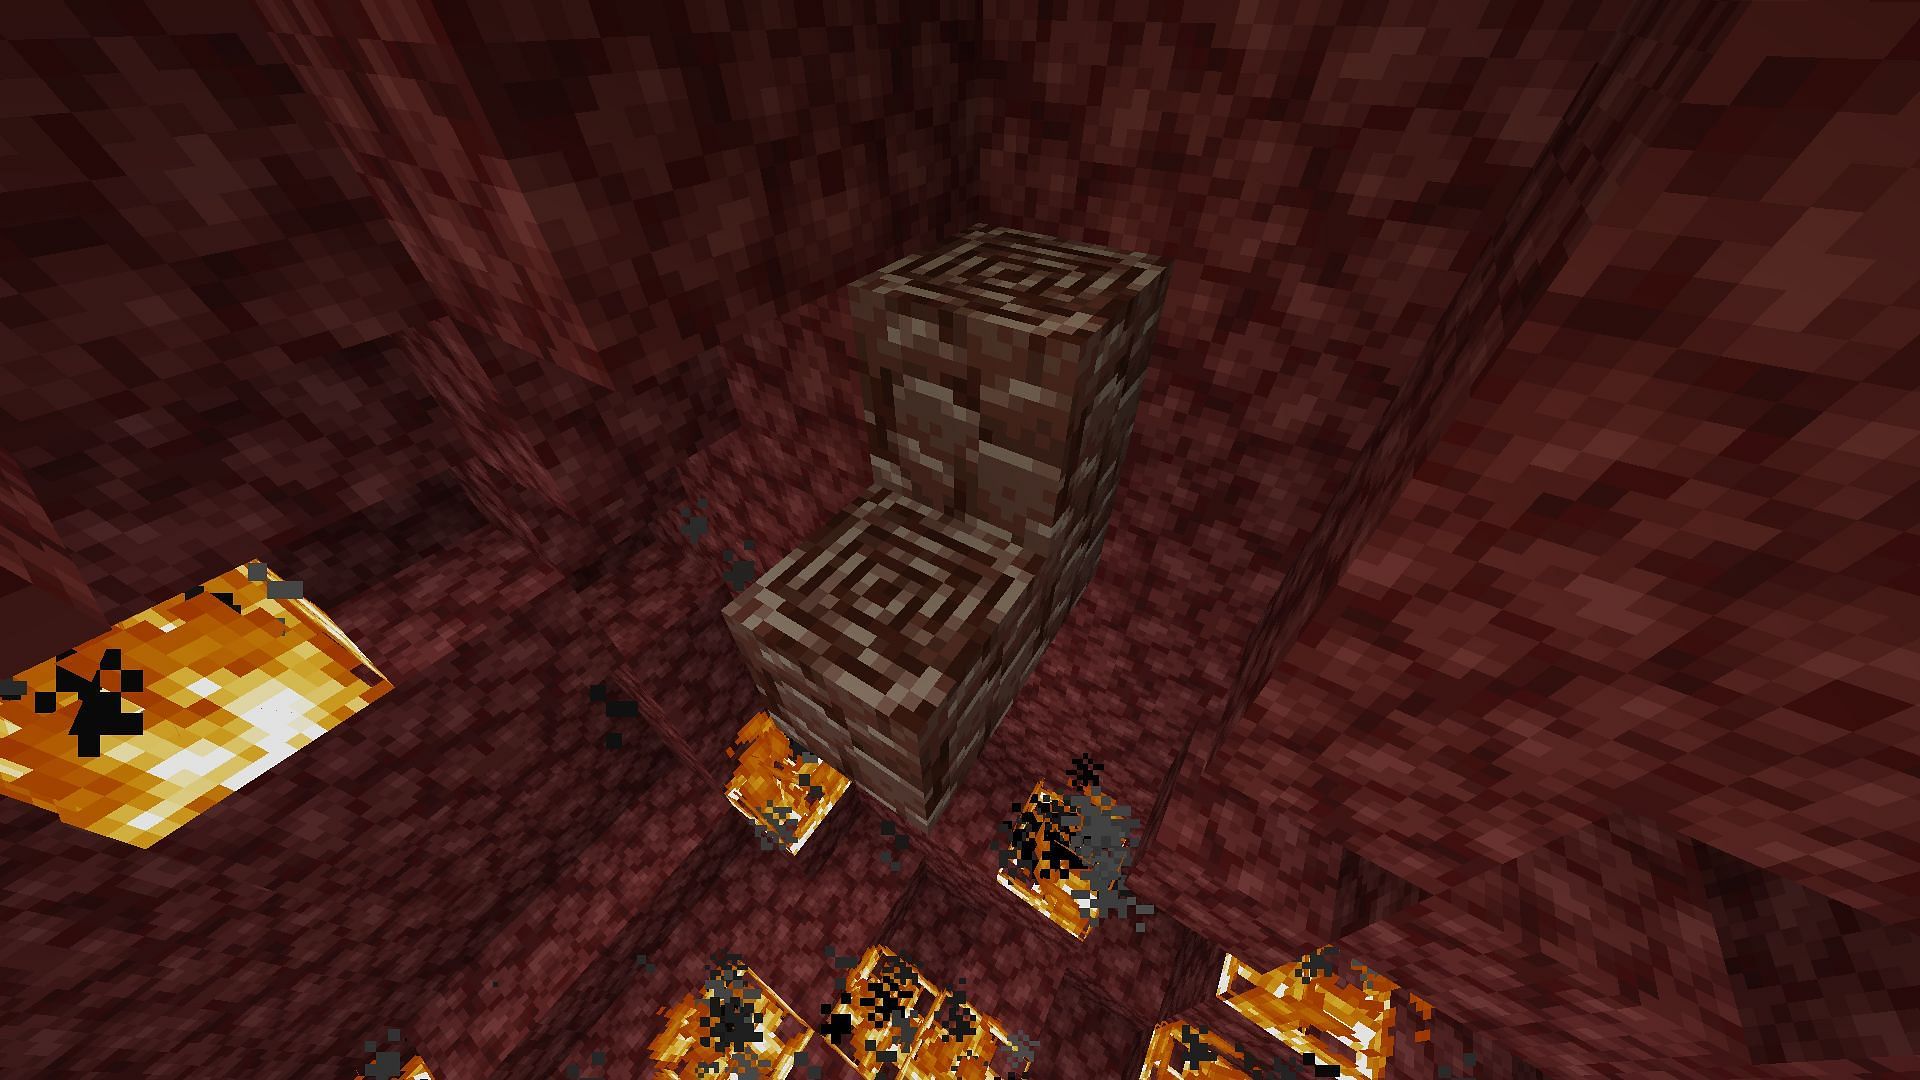 Ancient Debris is one of the rarest blocks in Minecraft (Image via Mojang)